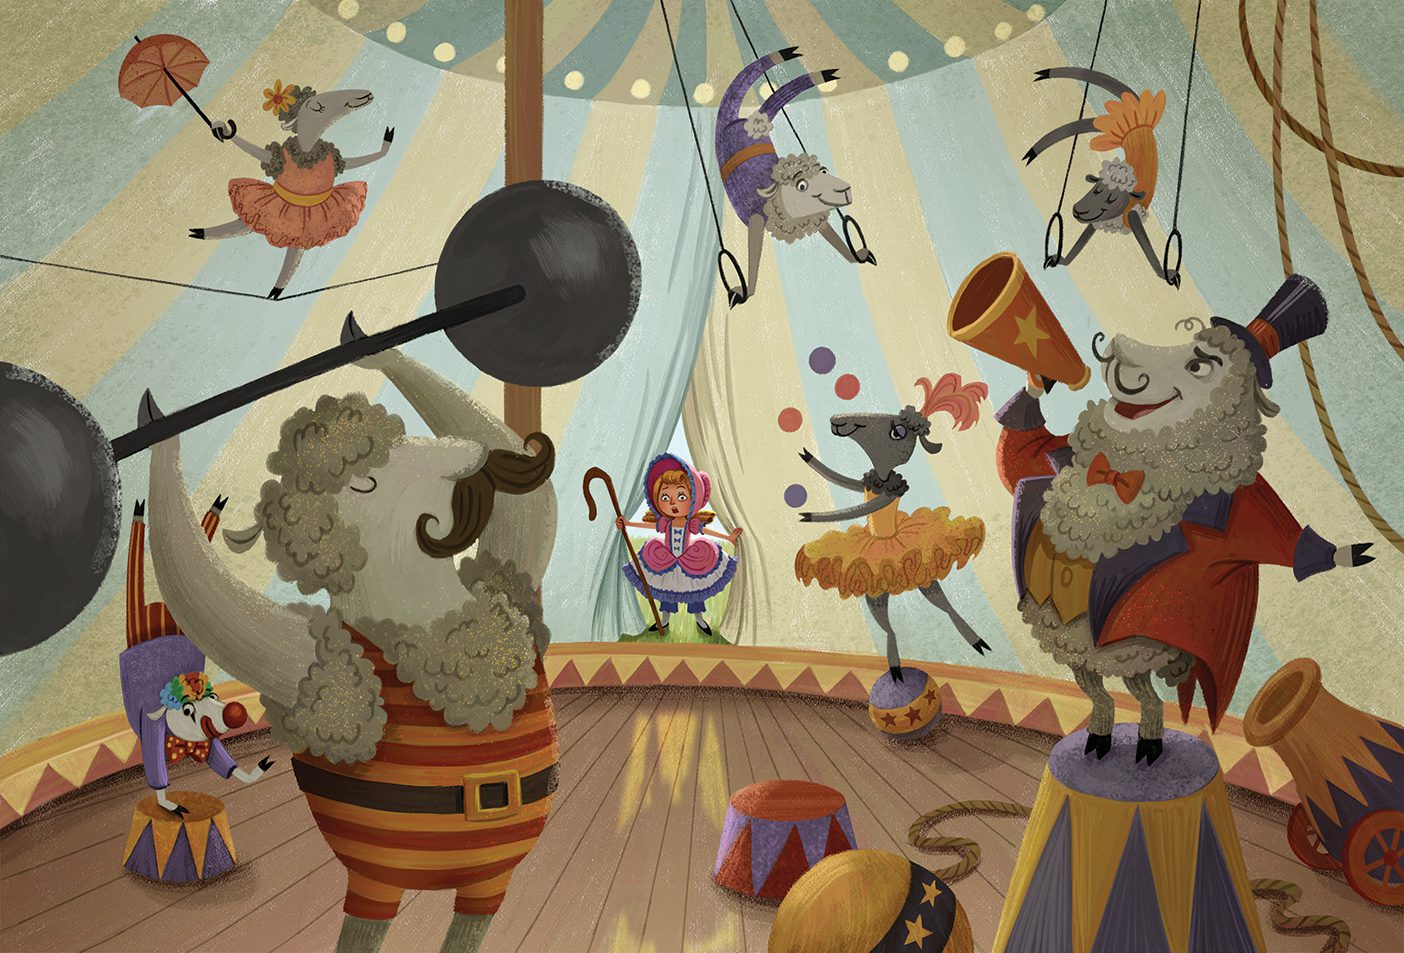 An illustration of Little Bo Peep finding her sheep performing a circus.